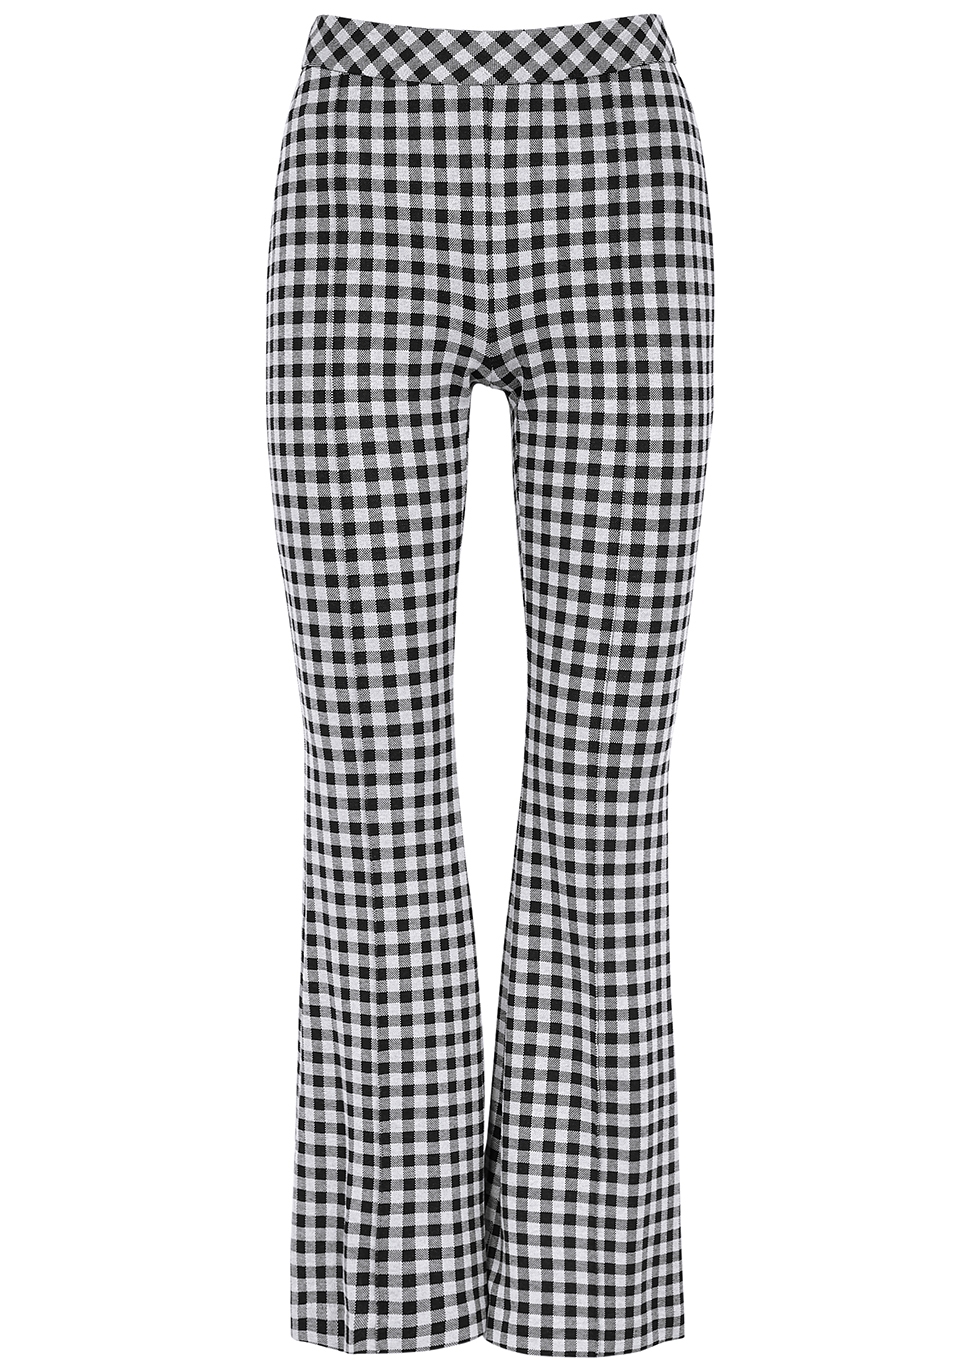 Monochrome gingham flared trousers